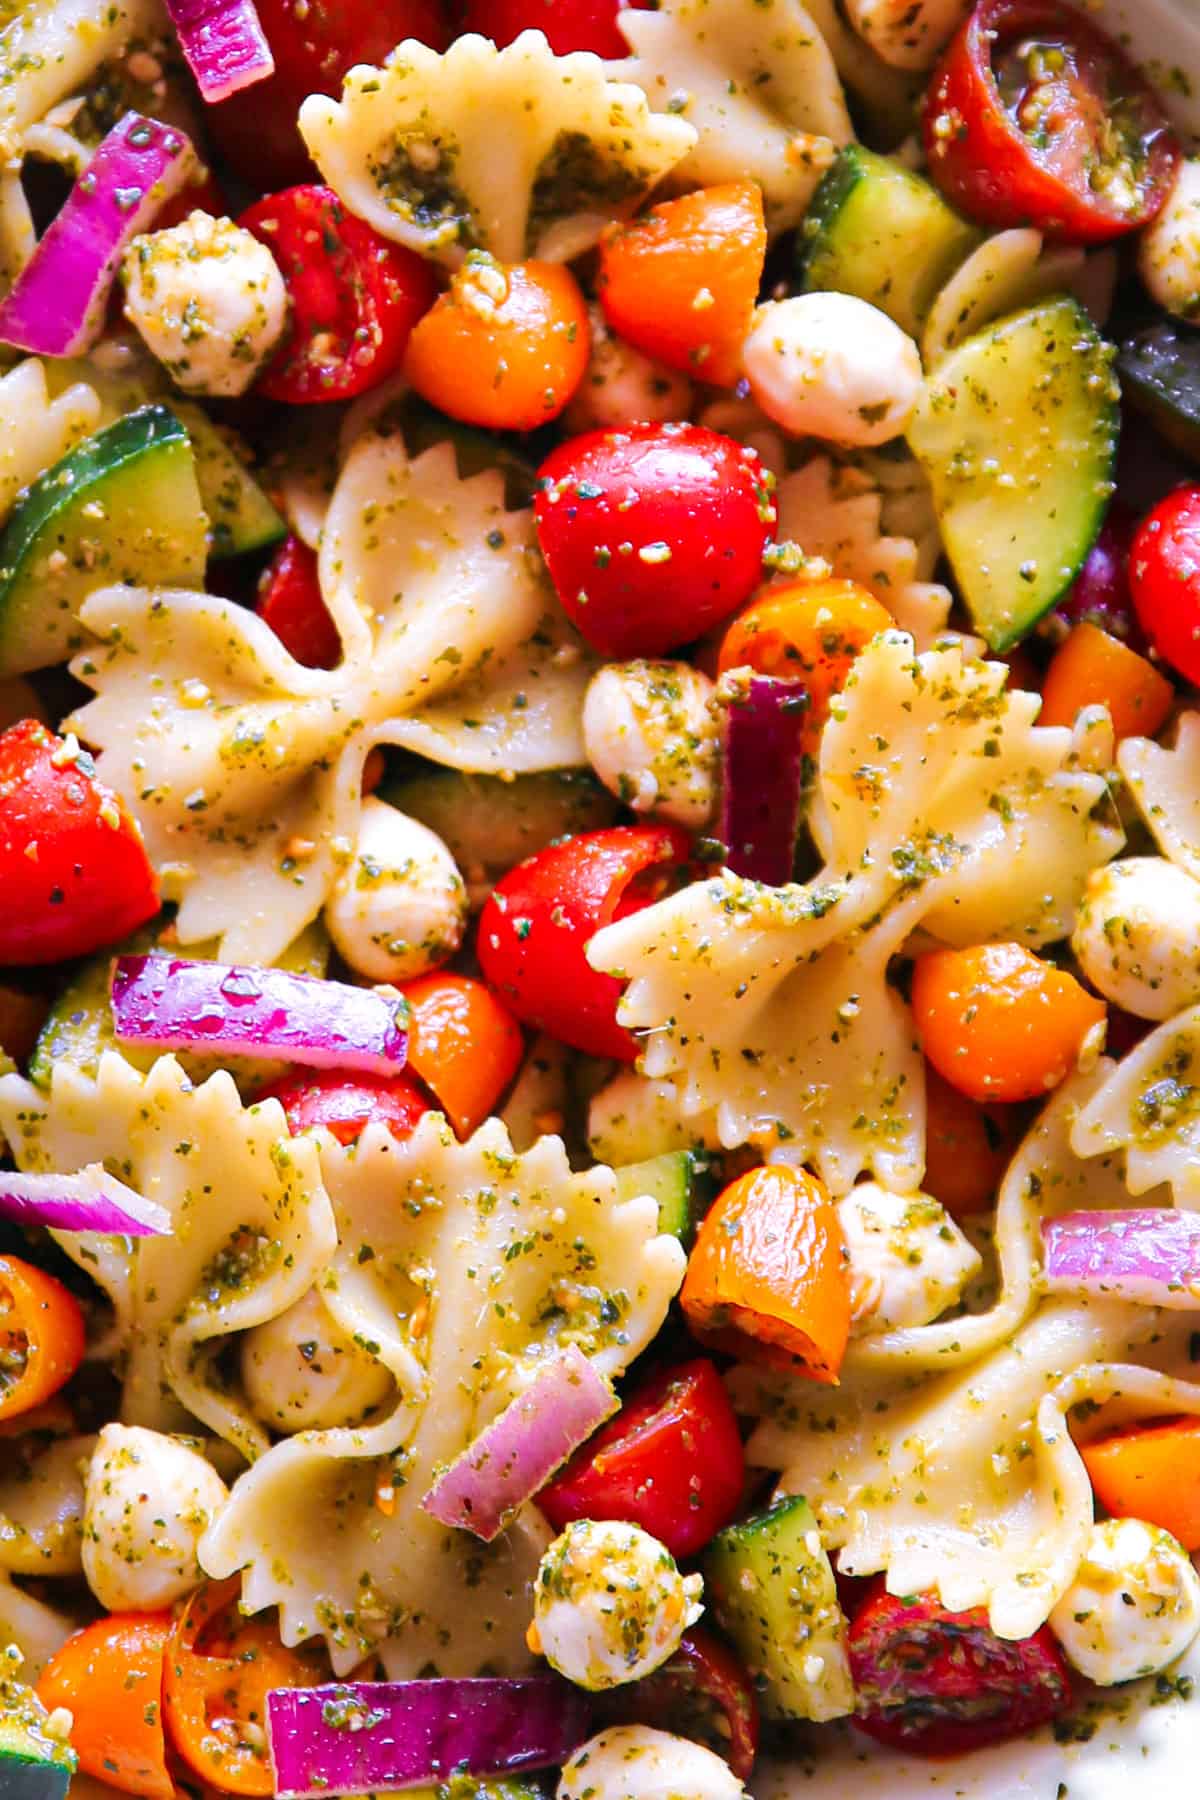 Pesto Pasta Salad with Cherry Tomatoes, Cucumber, Red Onion, and Mozzarella cheese - close-up photo.